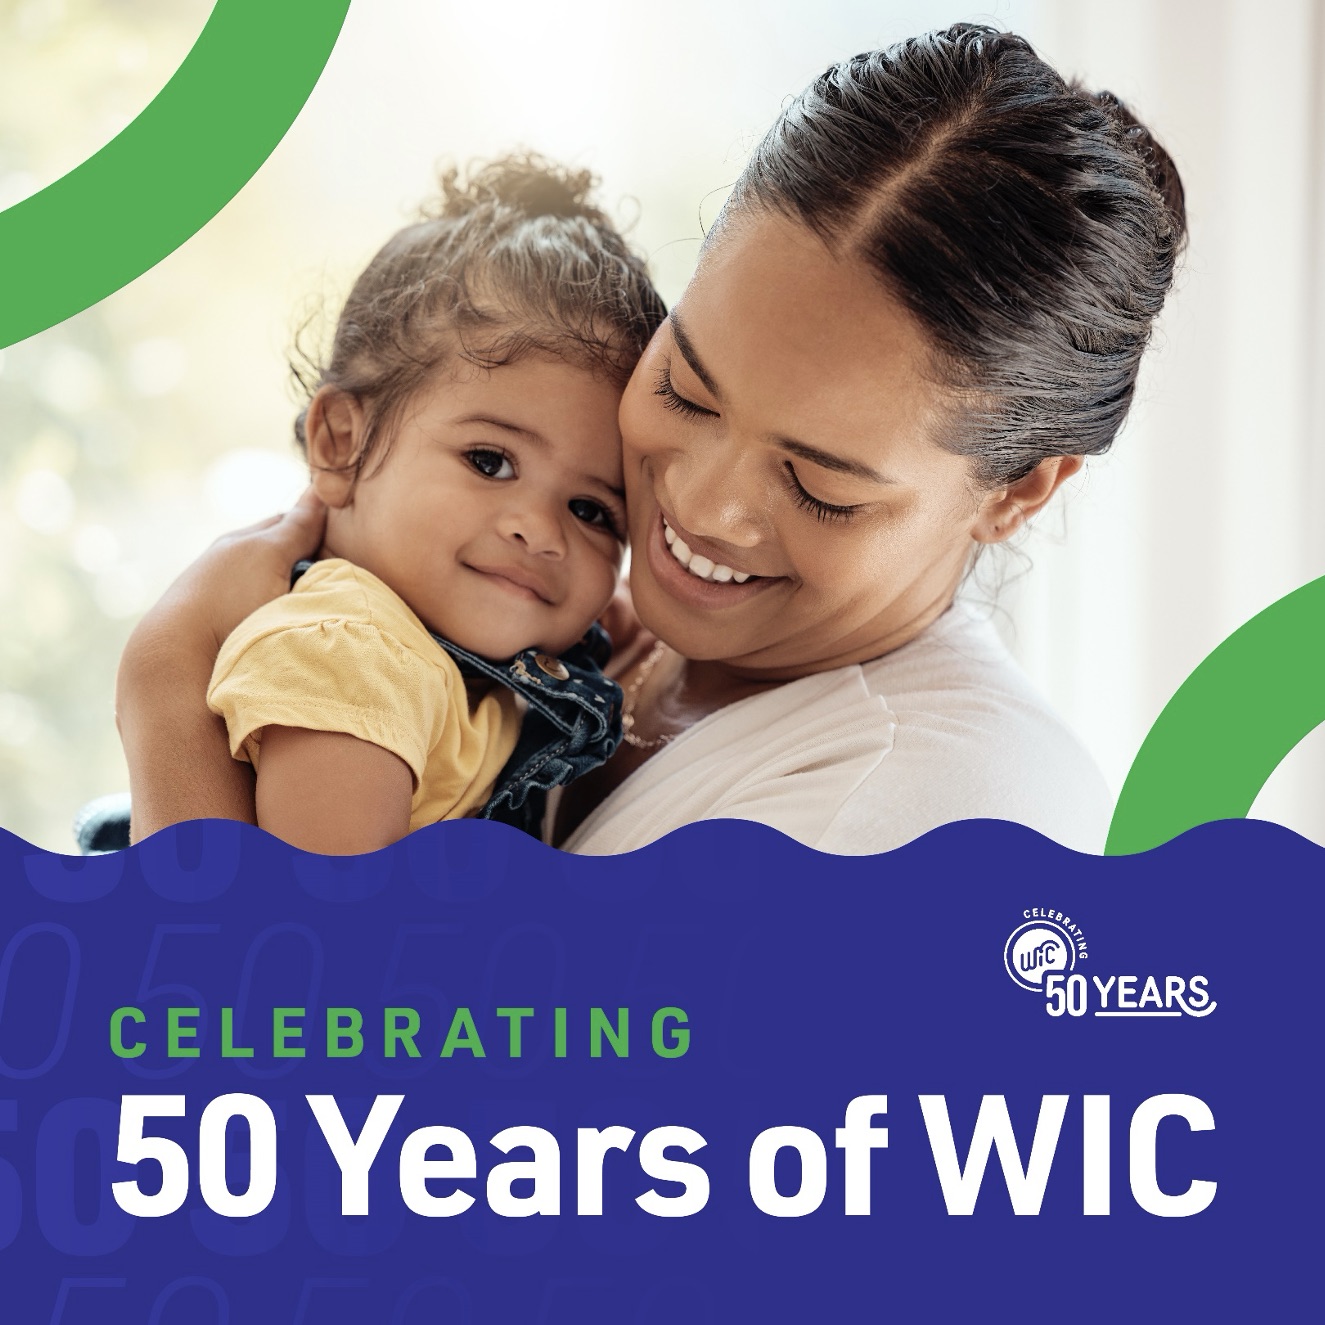 A young mom holding her toddler daughter on an image celebrating 50 years of WIC services